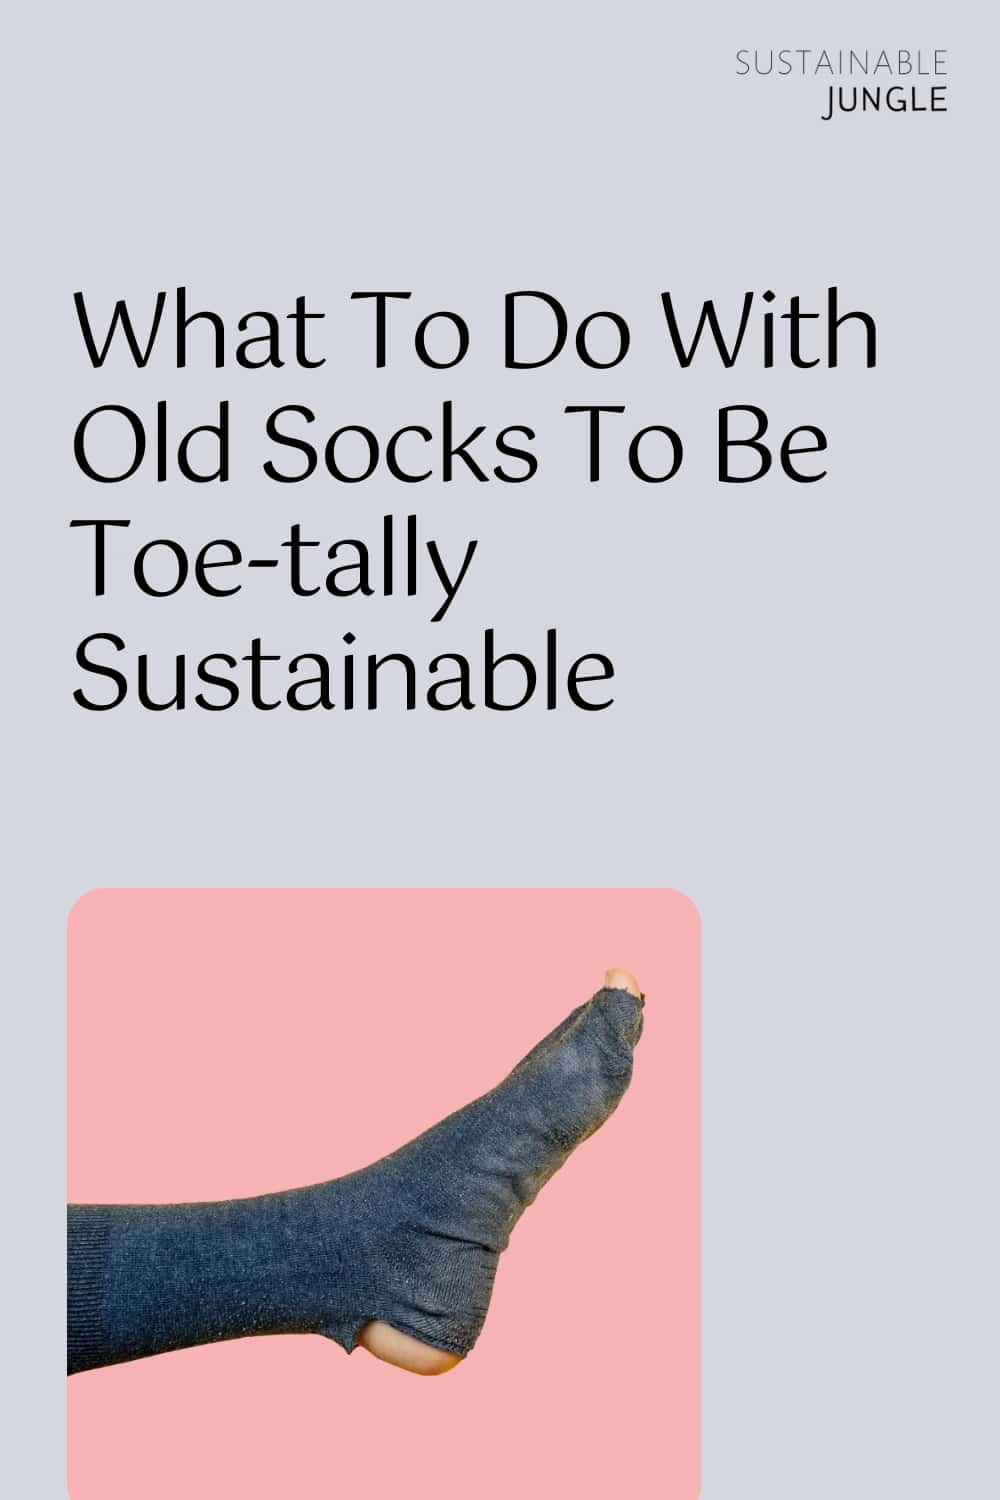 What To Do With Old Socks To Be Toe-tally Sustainable Image by yurakrasil #whattodowitholdsocks #usesforoldsocks #recyclingoldsocks #howtorecycleoldsocks #reuseoldsocks #whattodowithholeysocks #sustainablejungle